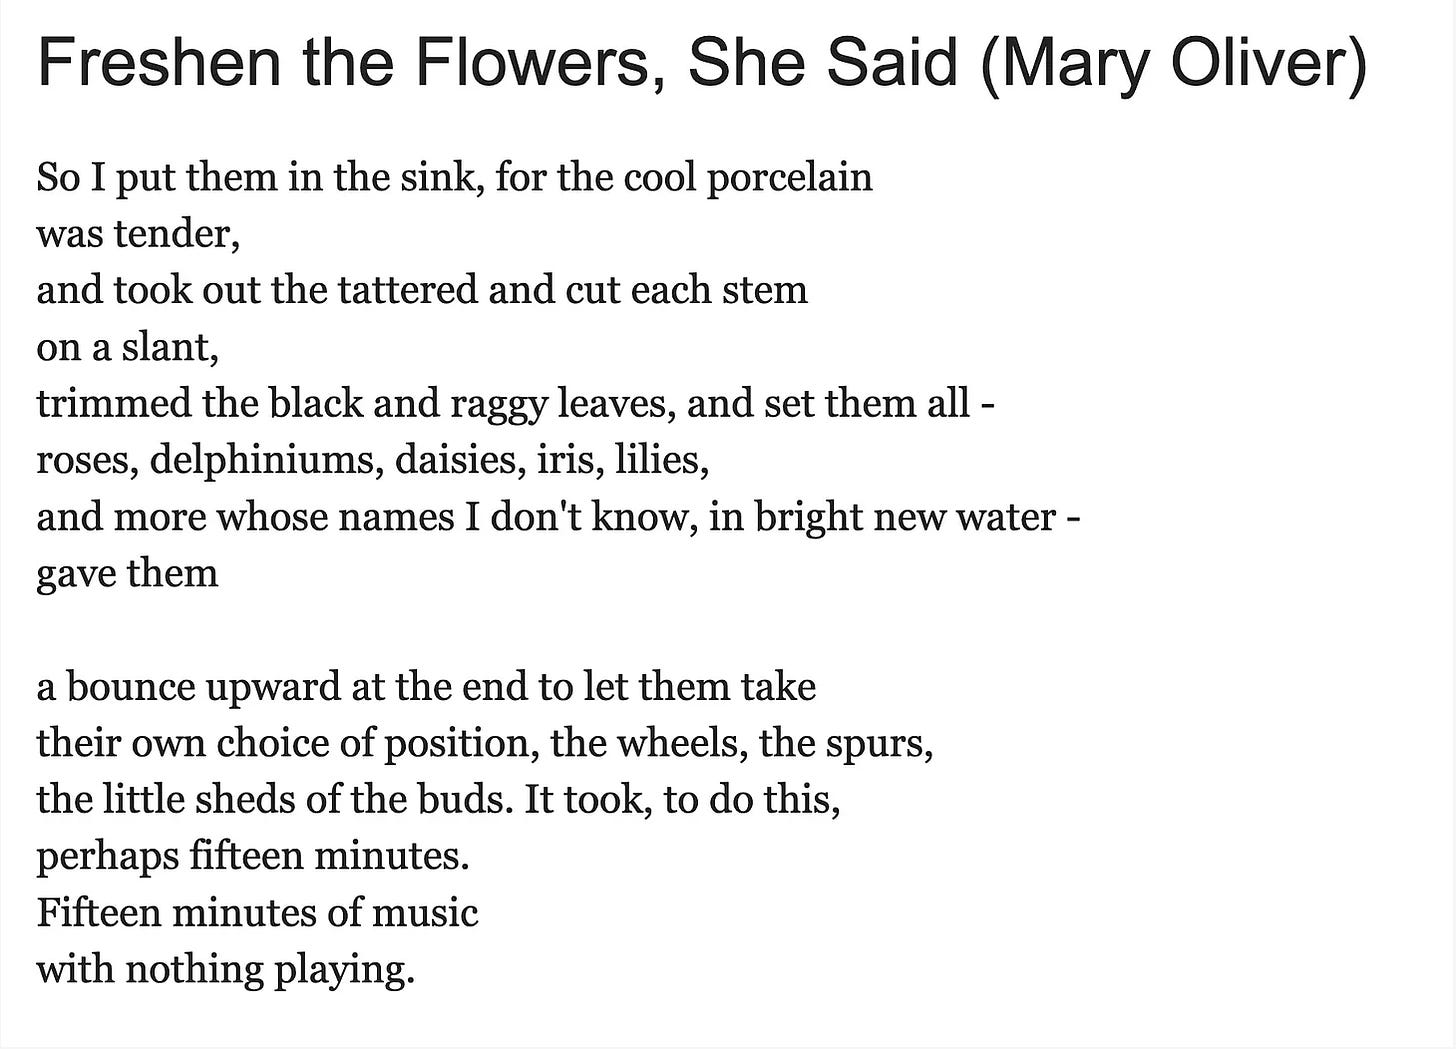 Mary Oliver's "Freshen the Flowers, She Said"